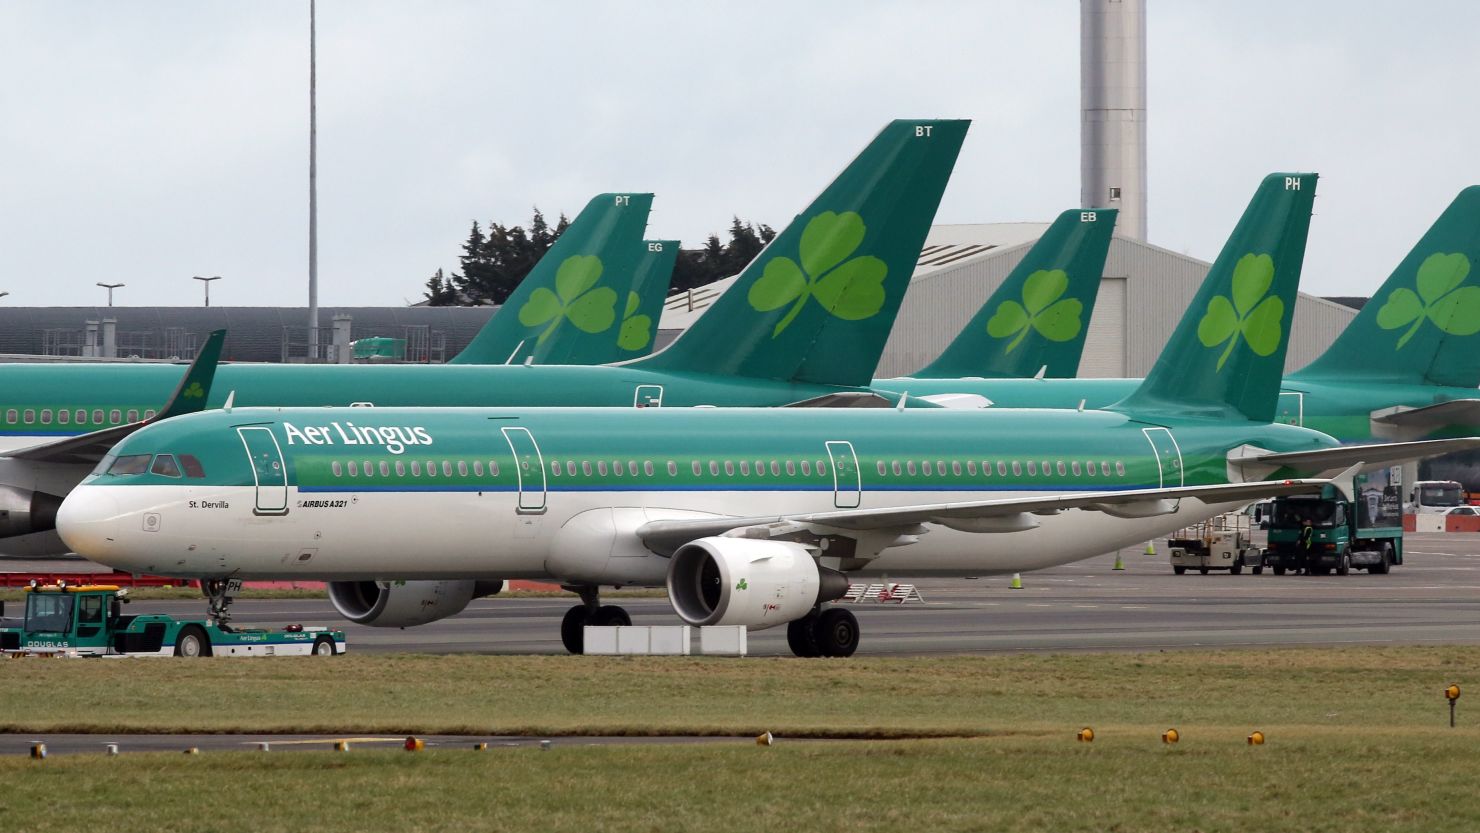 The flight from Lisbon to Dublin was diverted to Cork after the man became distressed.